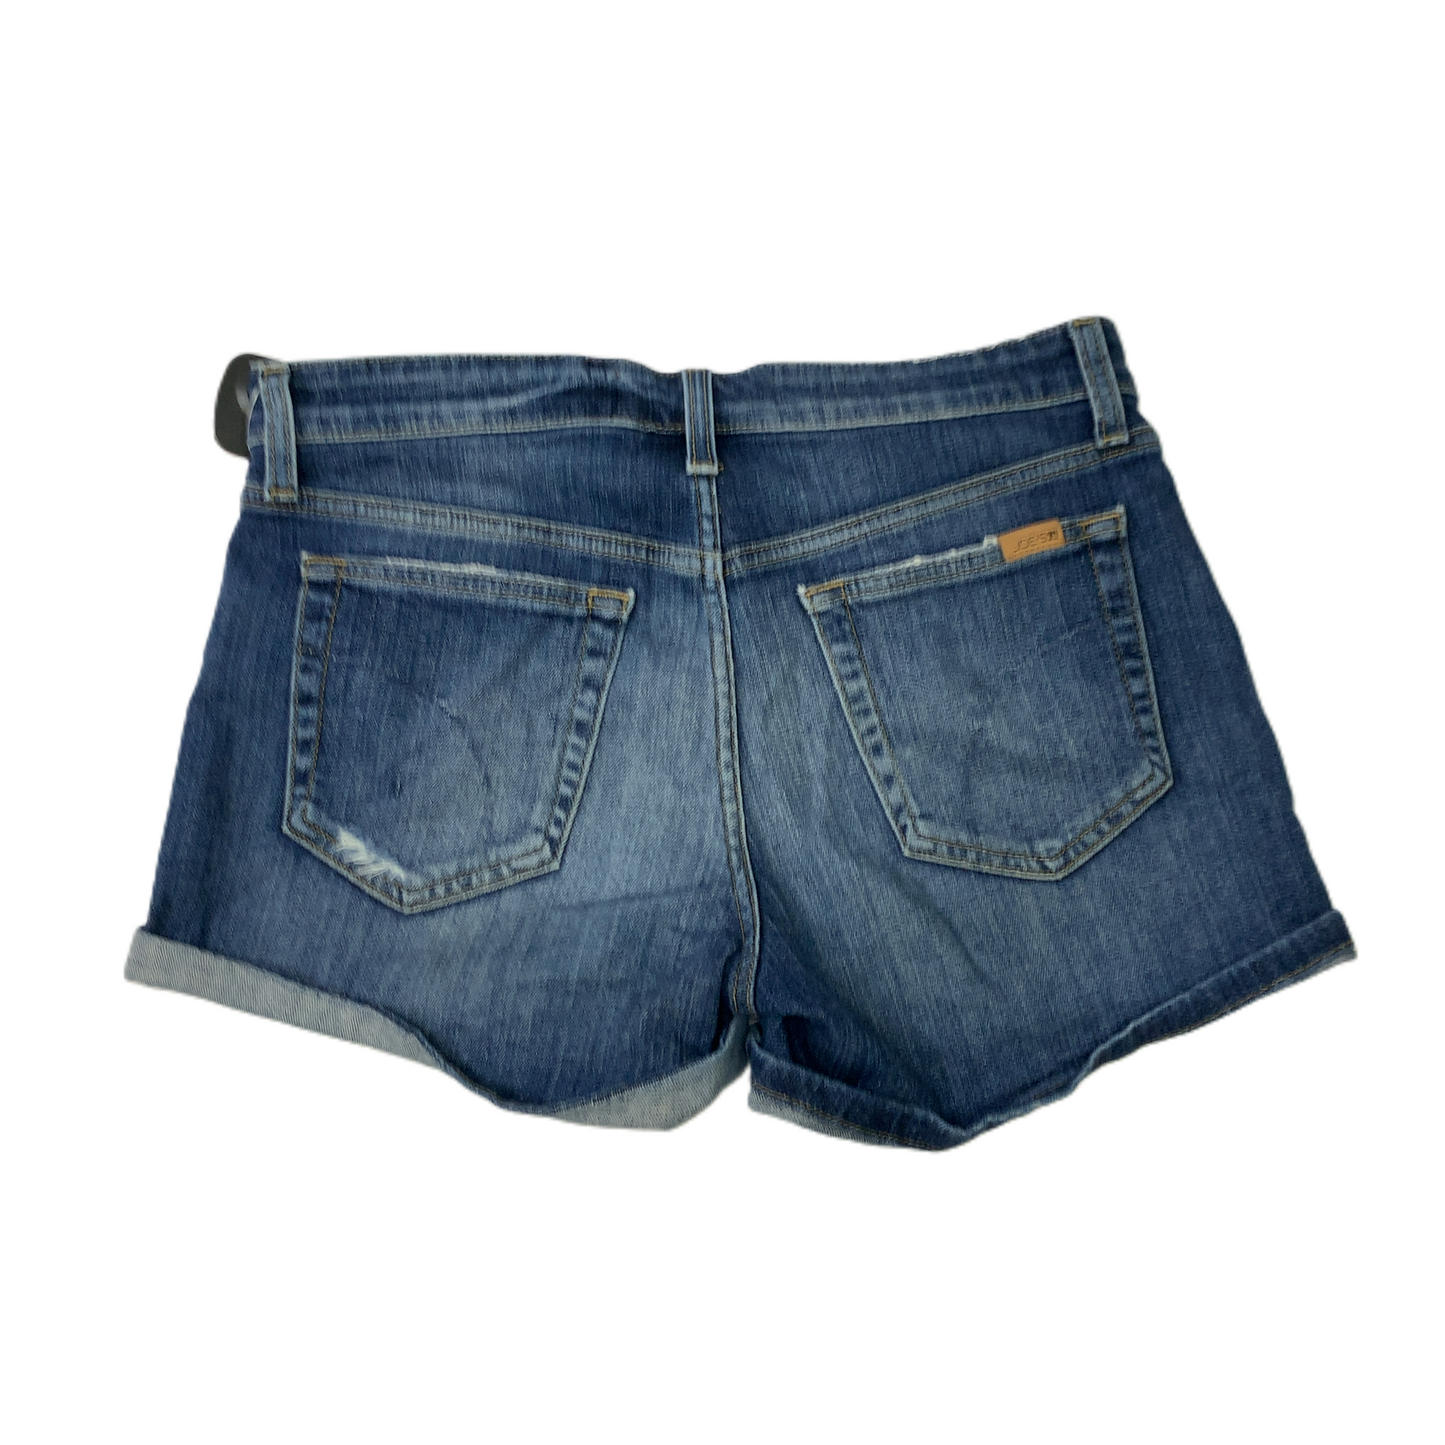 Shorts Designer By Joes Jeans  Size: 2